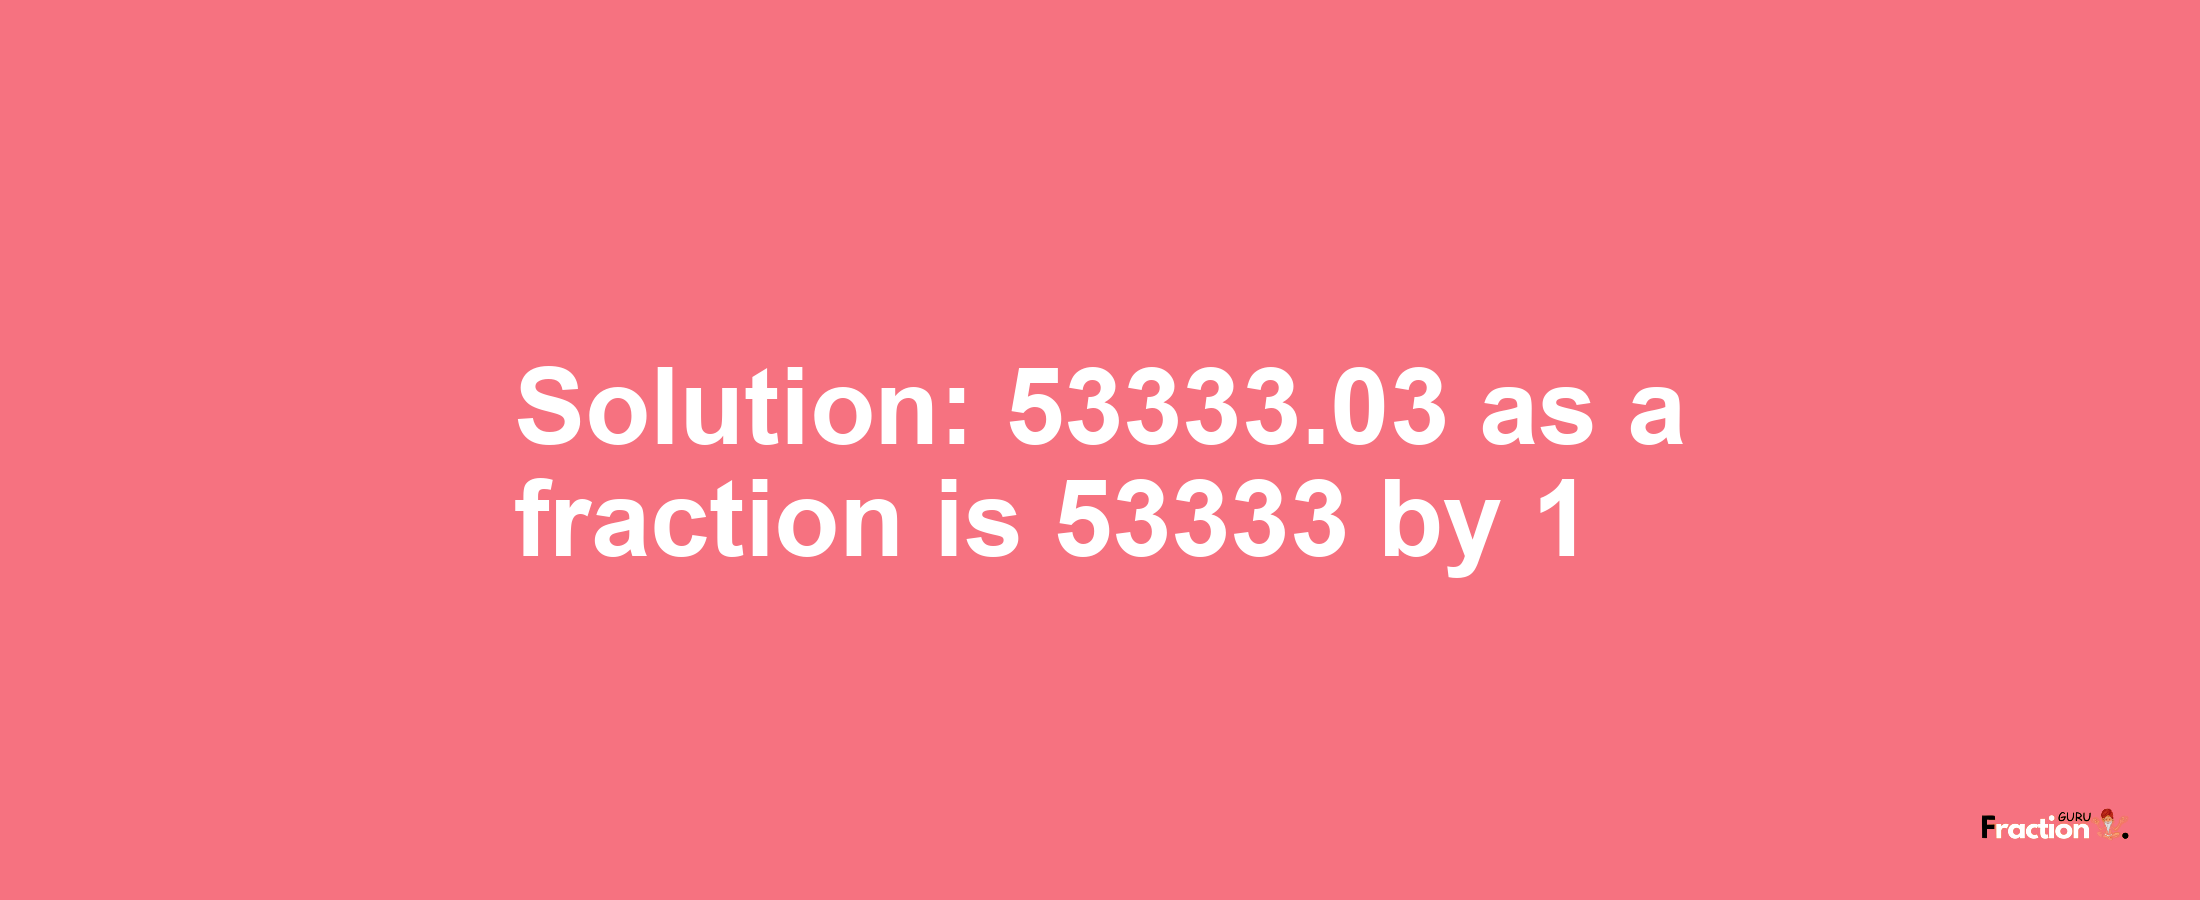 Solution:53333.03 as a fraction is 53333/1